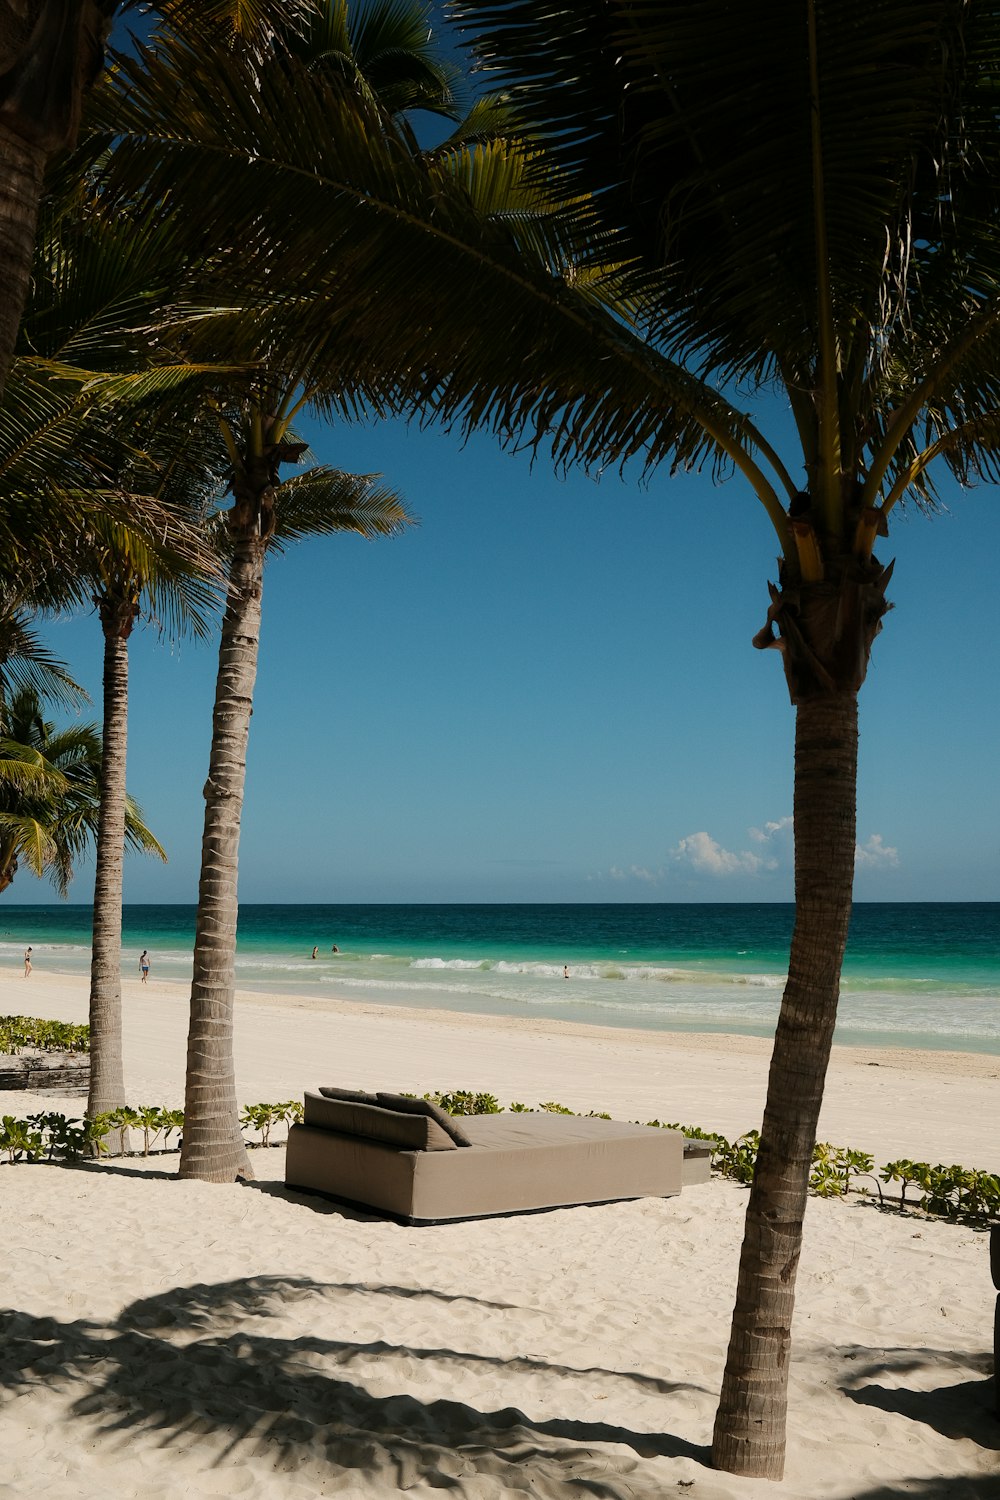 a beach with palm trees and a couch on the sand